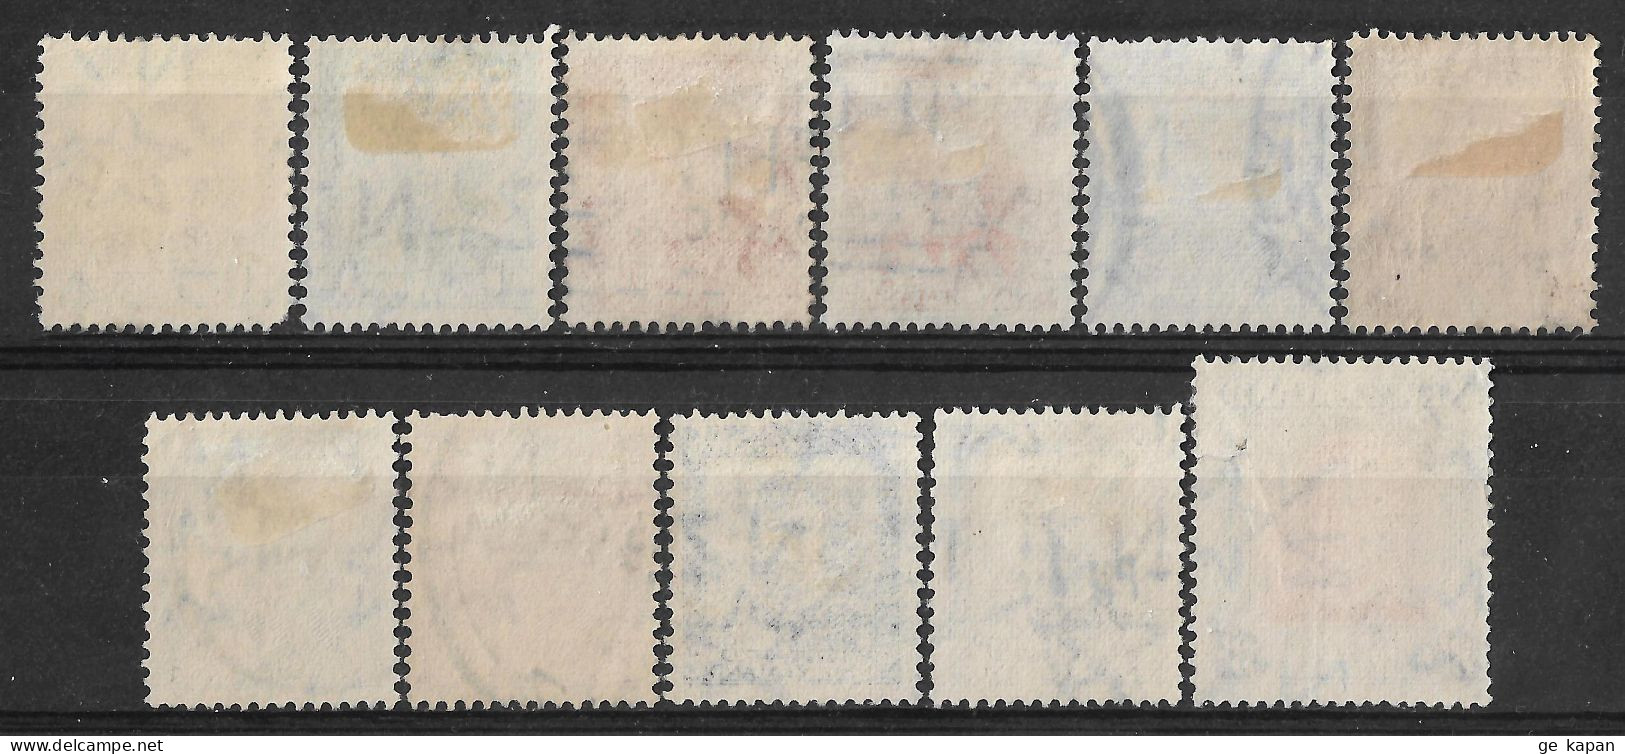 1938-1947 NEW ZEALAND Set Of 11 Used Stamps (Scott # 227A,228B,228C,258,260-264,268) CV $4.40 - Used Stamps